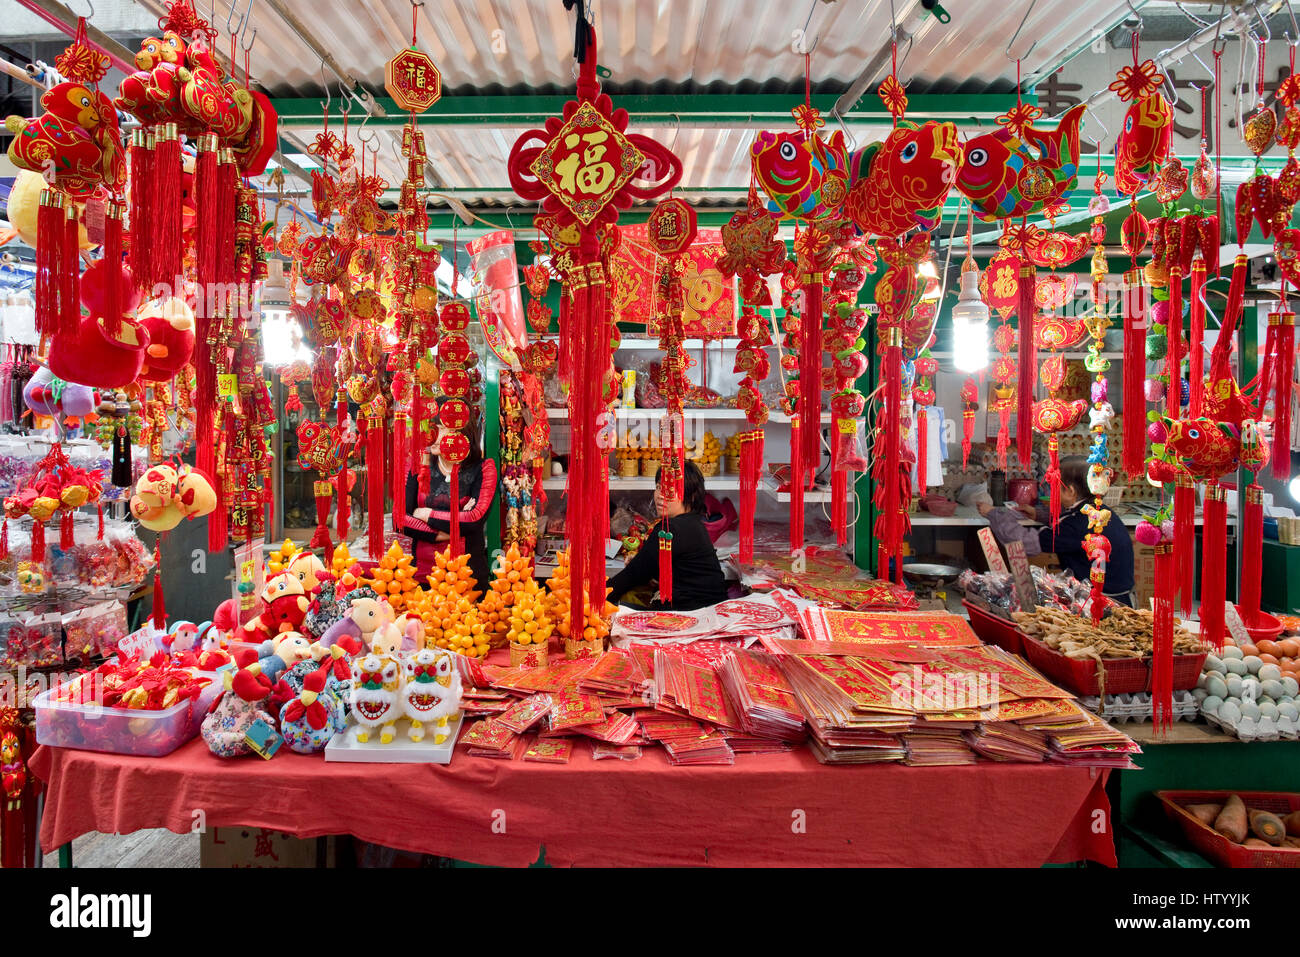 Chinese new year decorations hanging up for sale at a market in ...